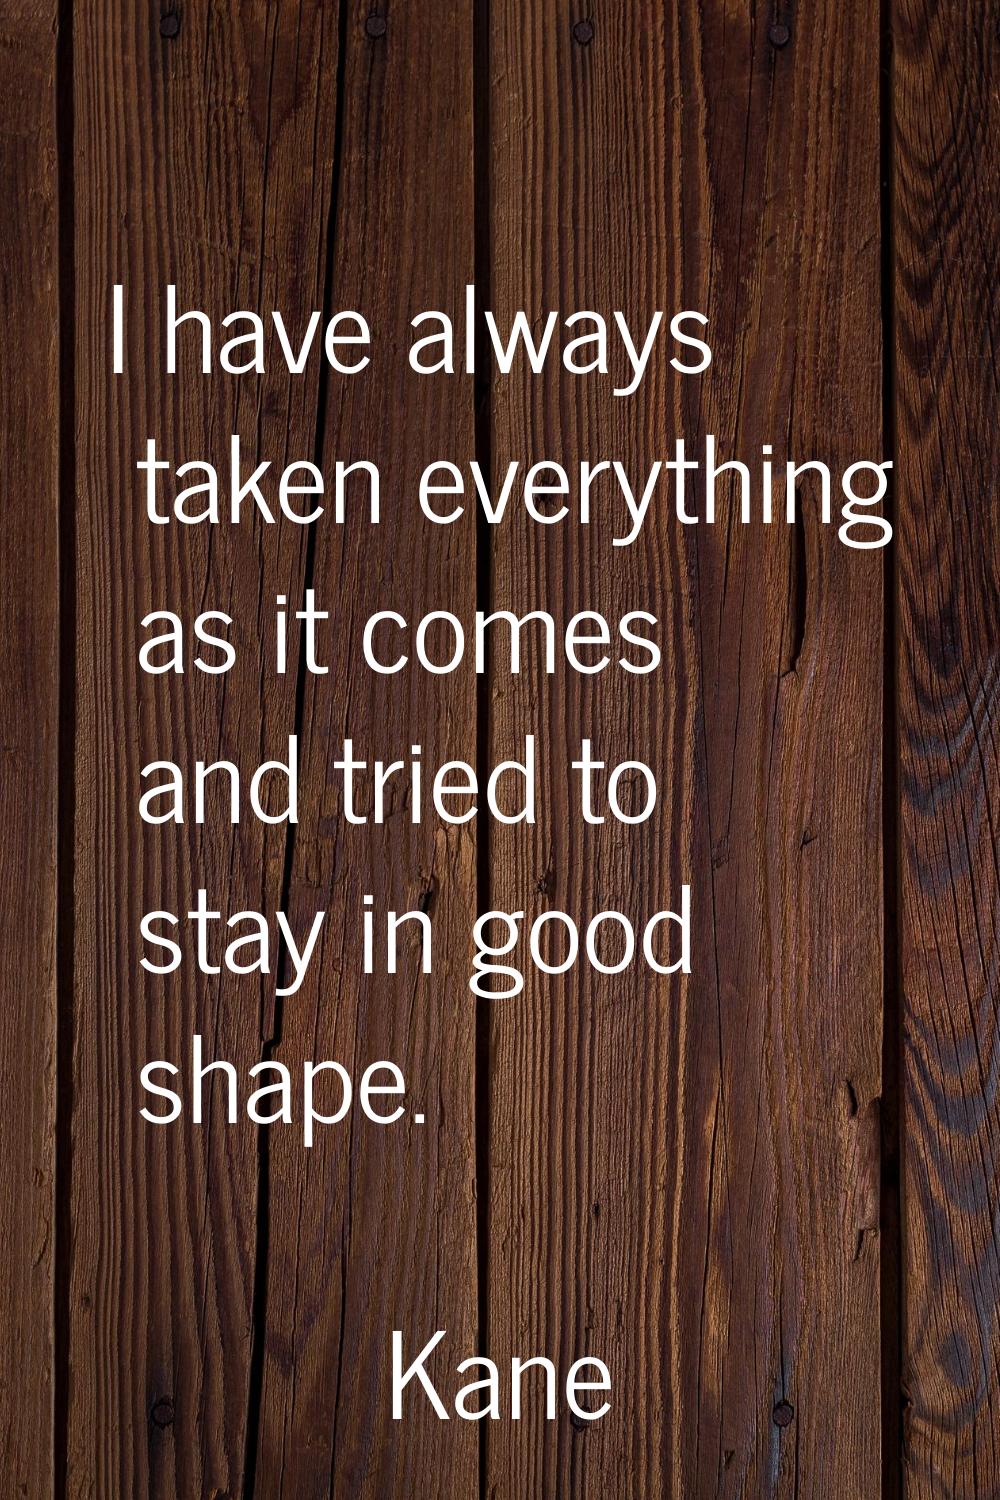 I have always taken everything as it comes and tried to stay in good shape.